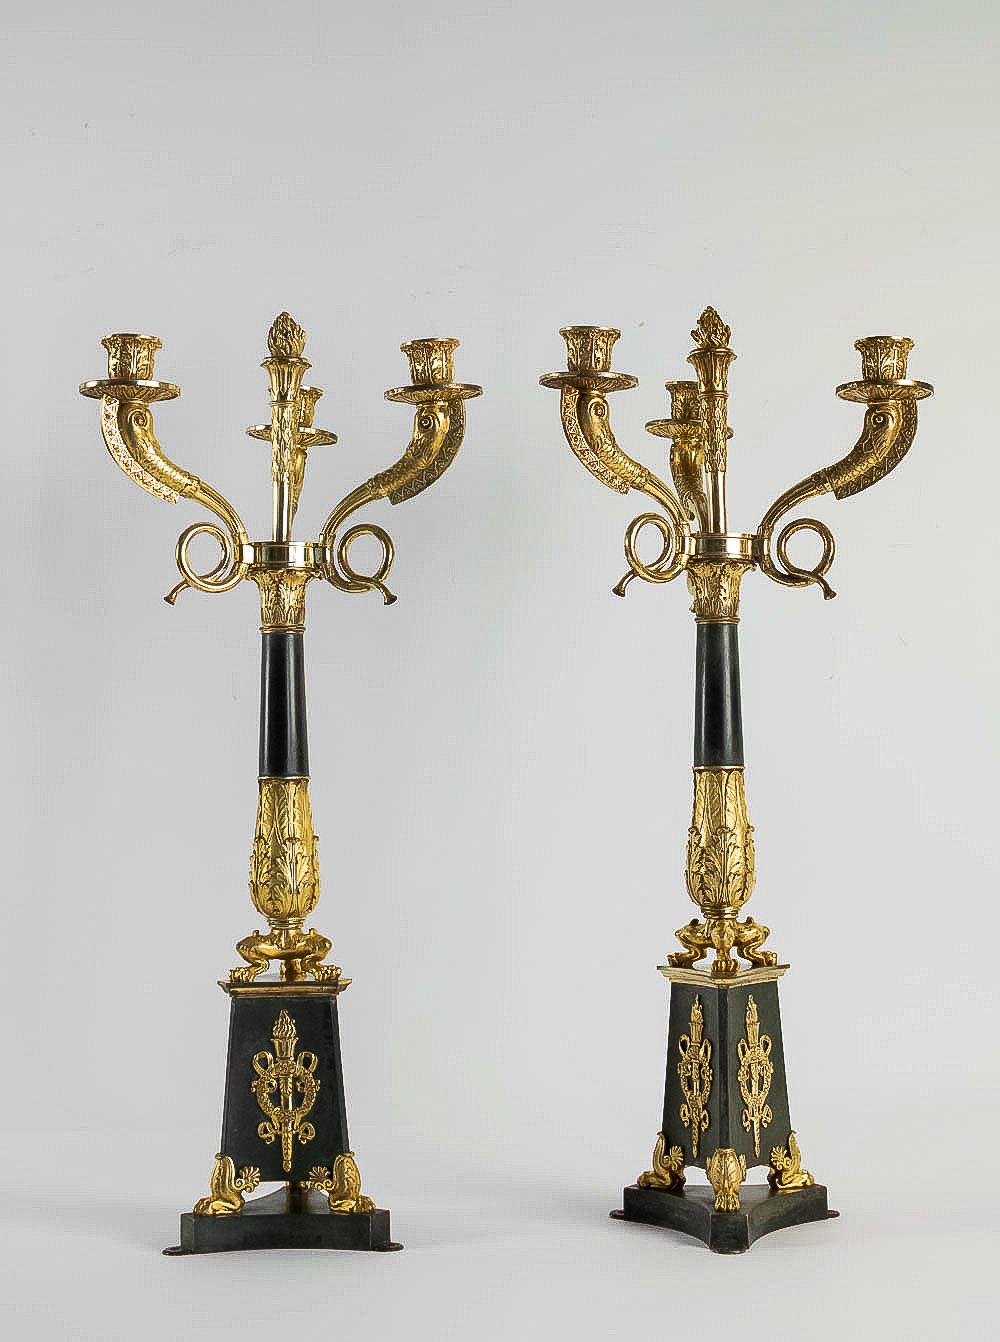 A magnificent large pair of three-light gilt bronze and patinated-bronze Restauration period candelabra, manufactured in the early 19th century circa 1815-1830. This pair of candelabra is set on a patinated-bronze base with ormolu mounts held up by